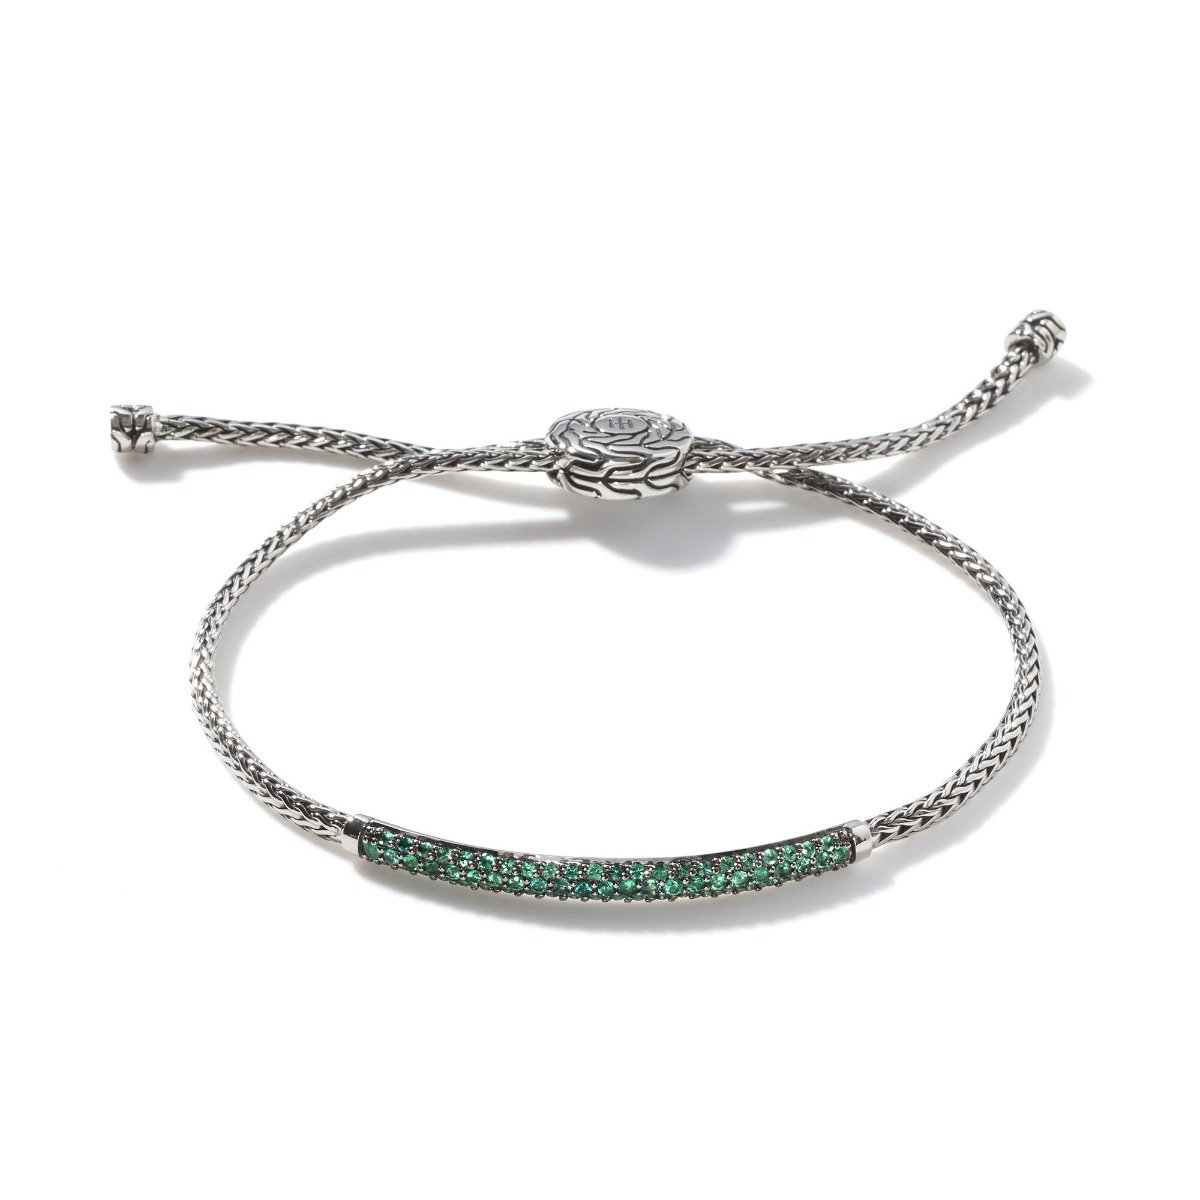 John Hardy "Classic Chain" sterling silver adjustable pull-through station bracelet featuring an emerald bar